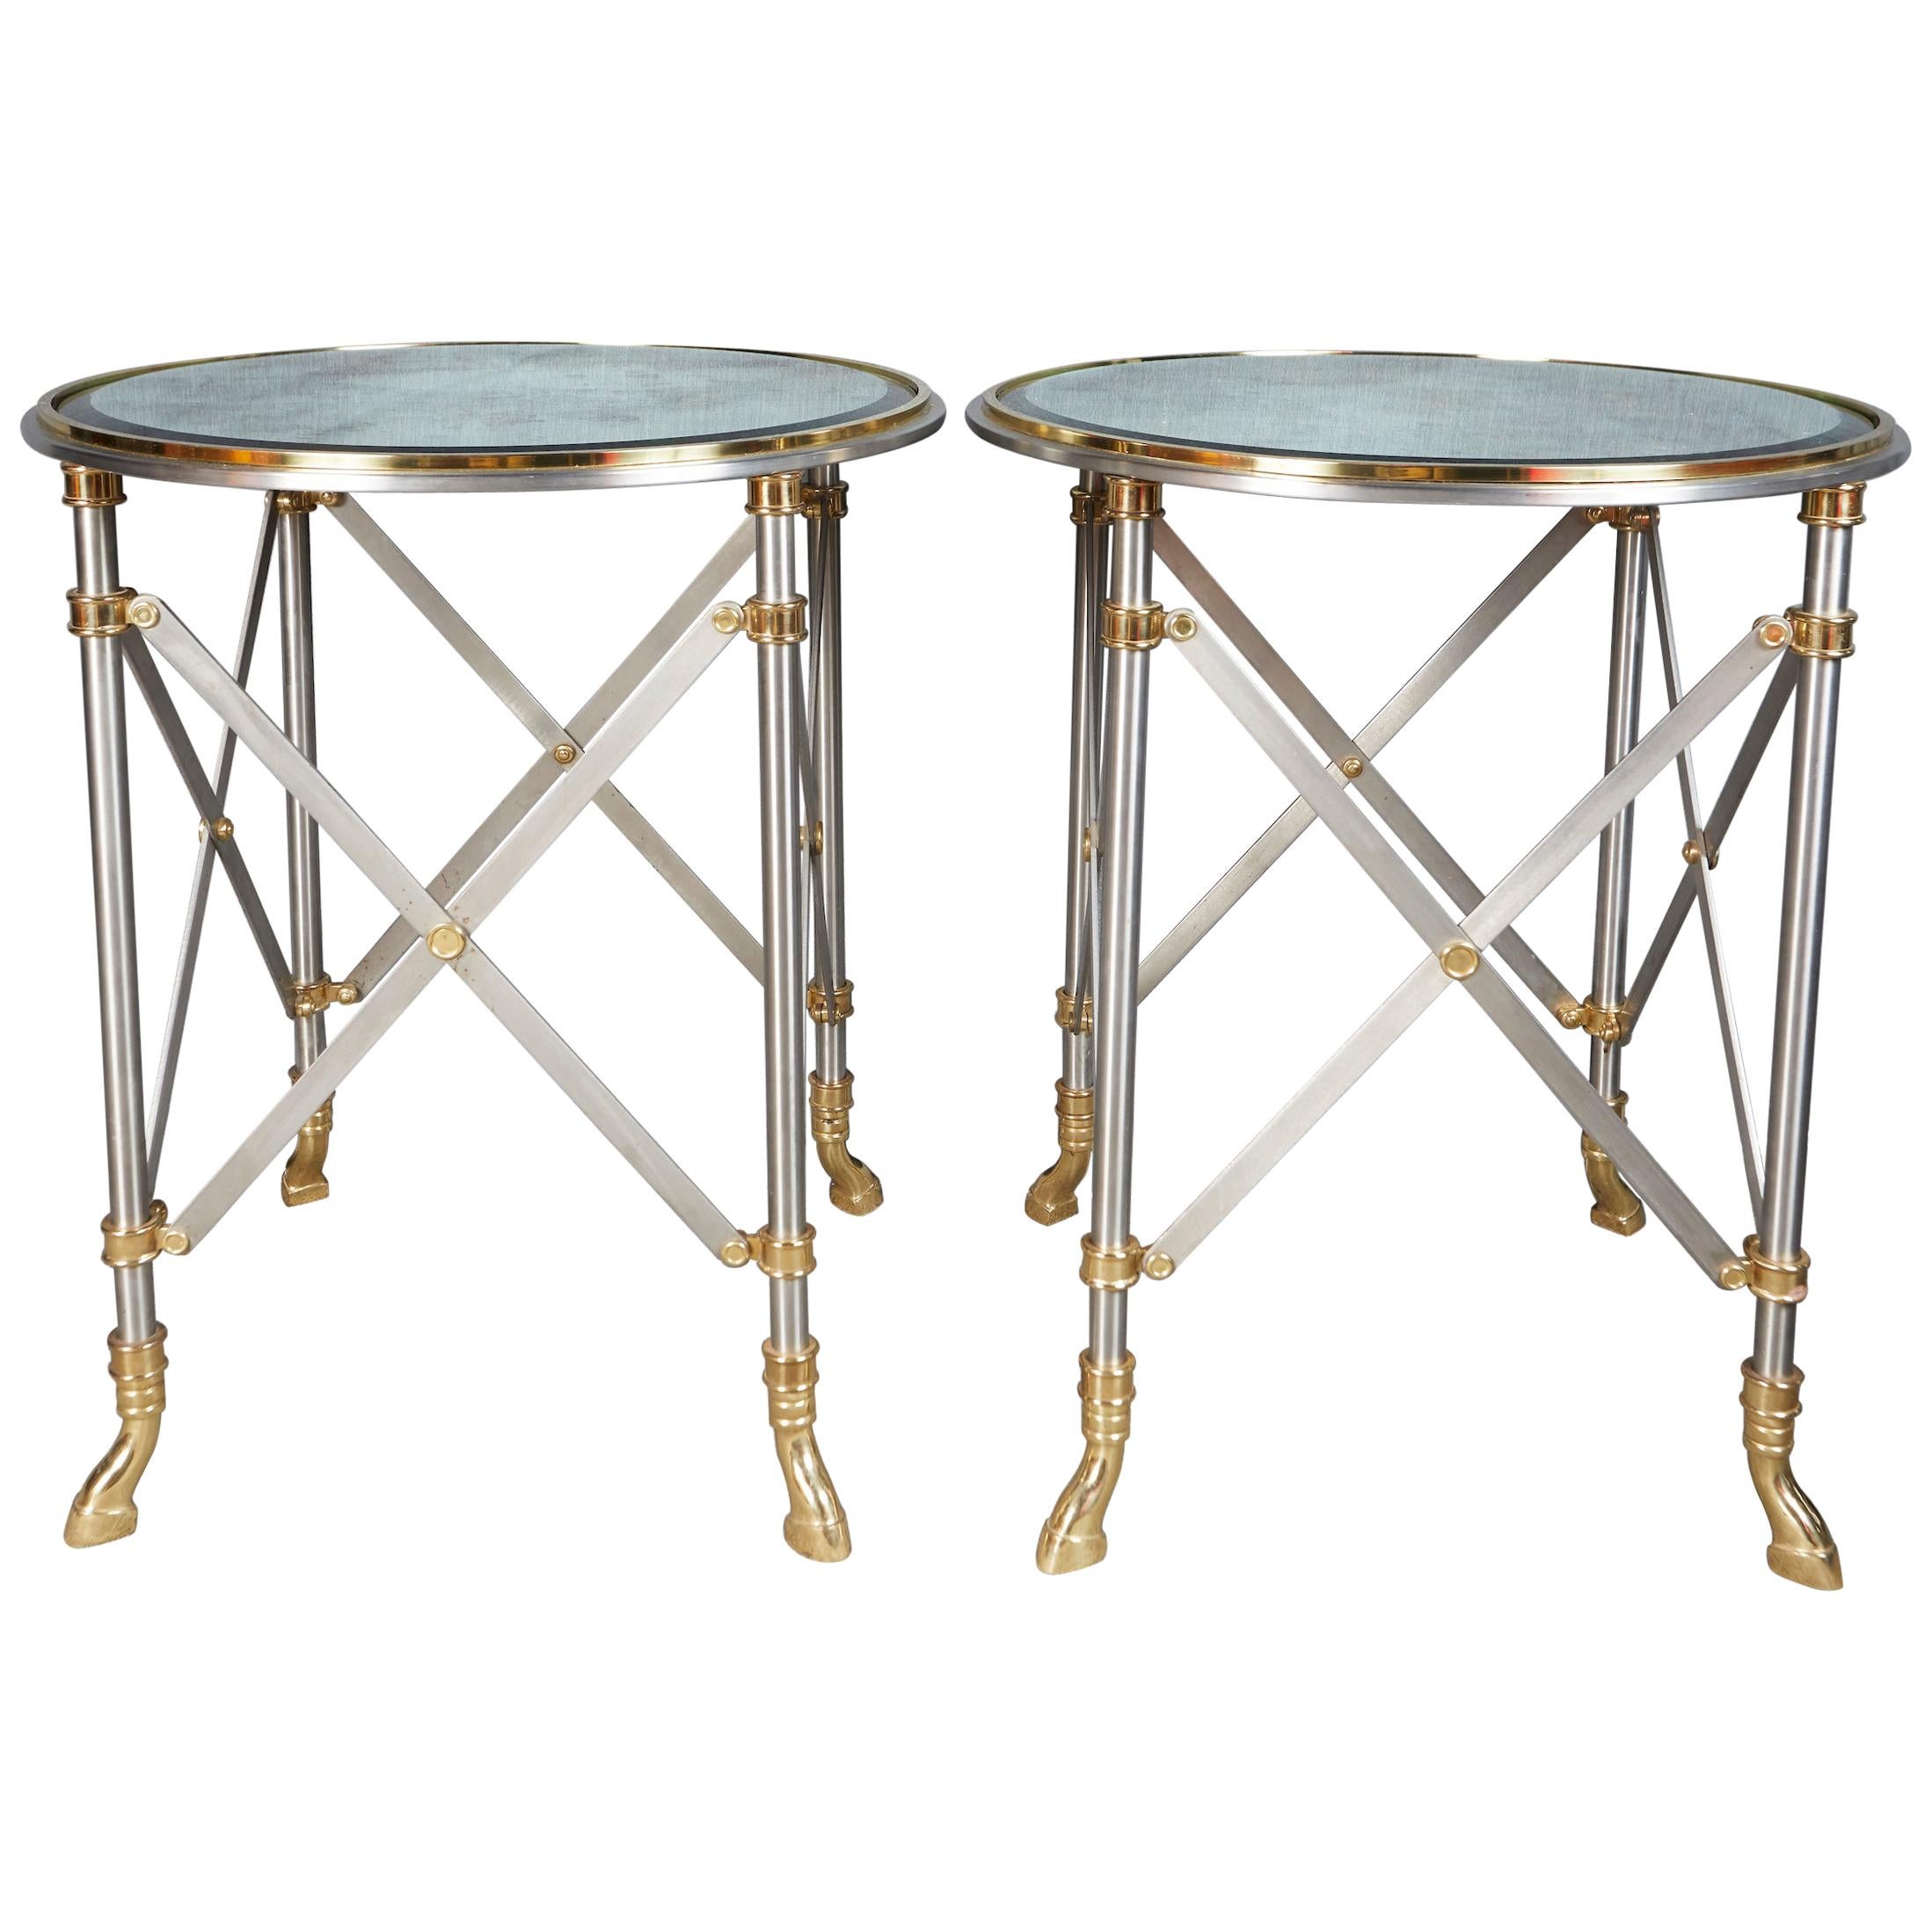 Pair of Brass and Polished Steel Side Tables by Maison Jansen